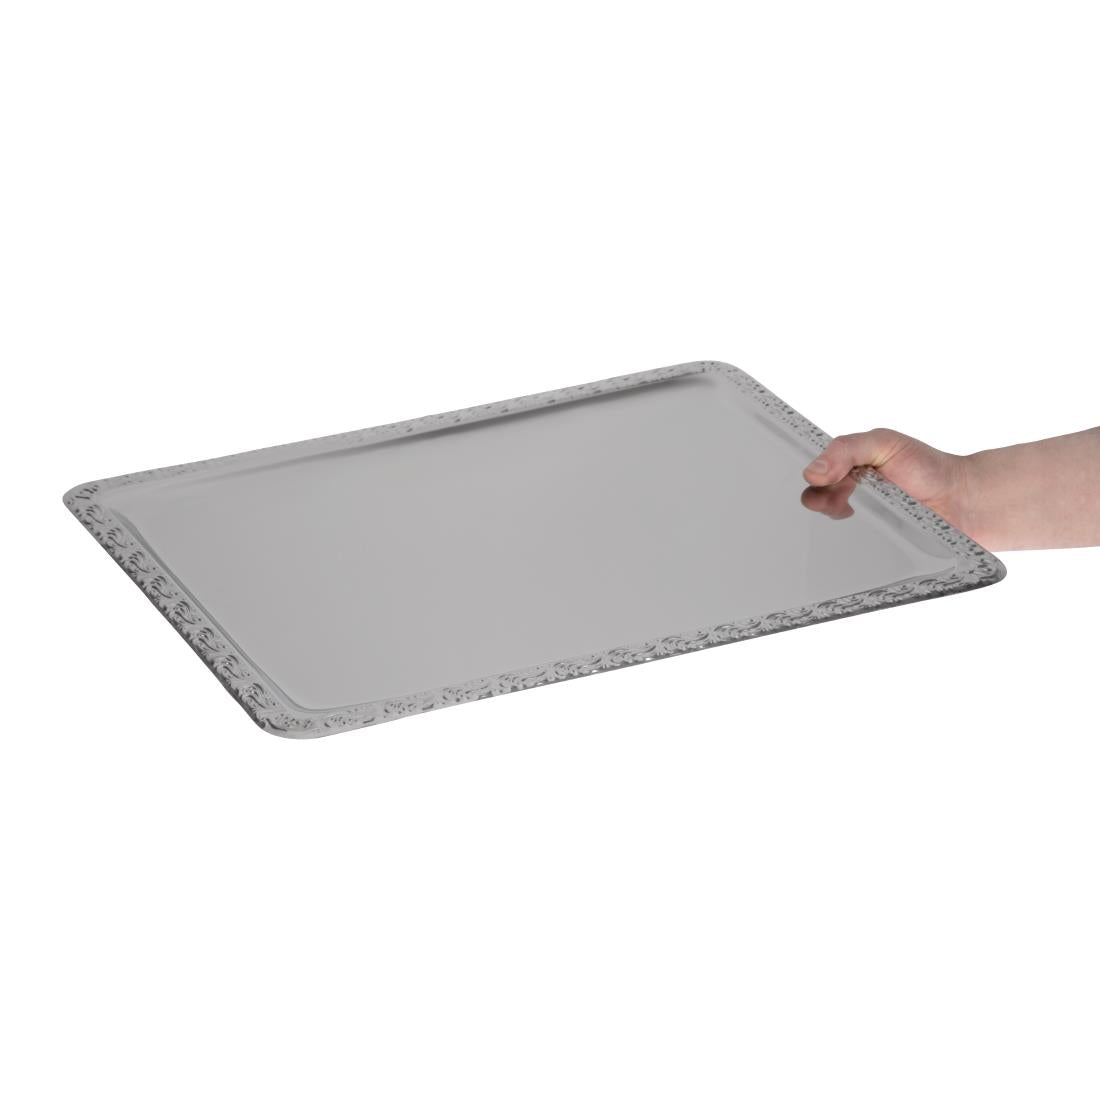 P006 APS Stainless Steel Rectangular Service Tray 500mm